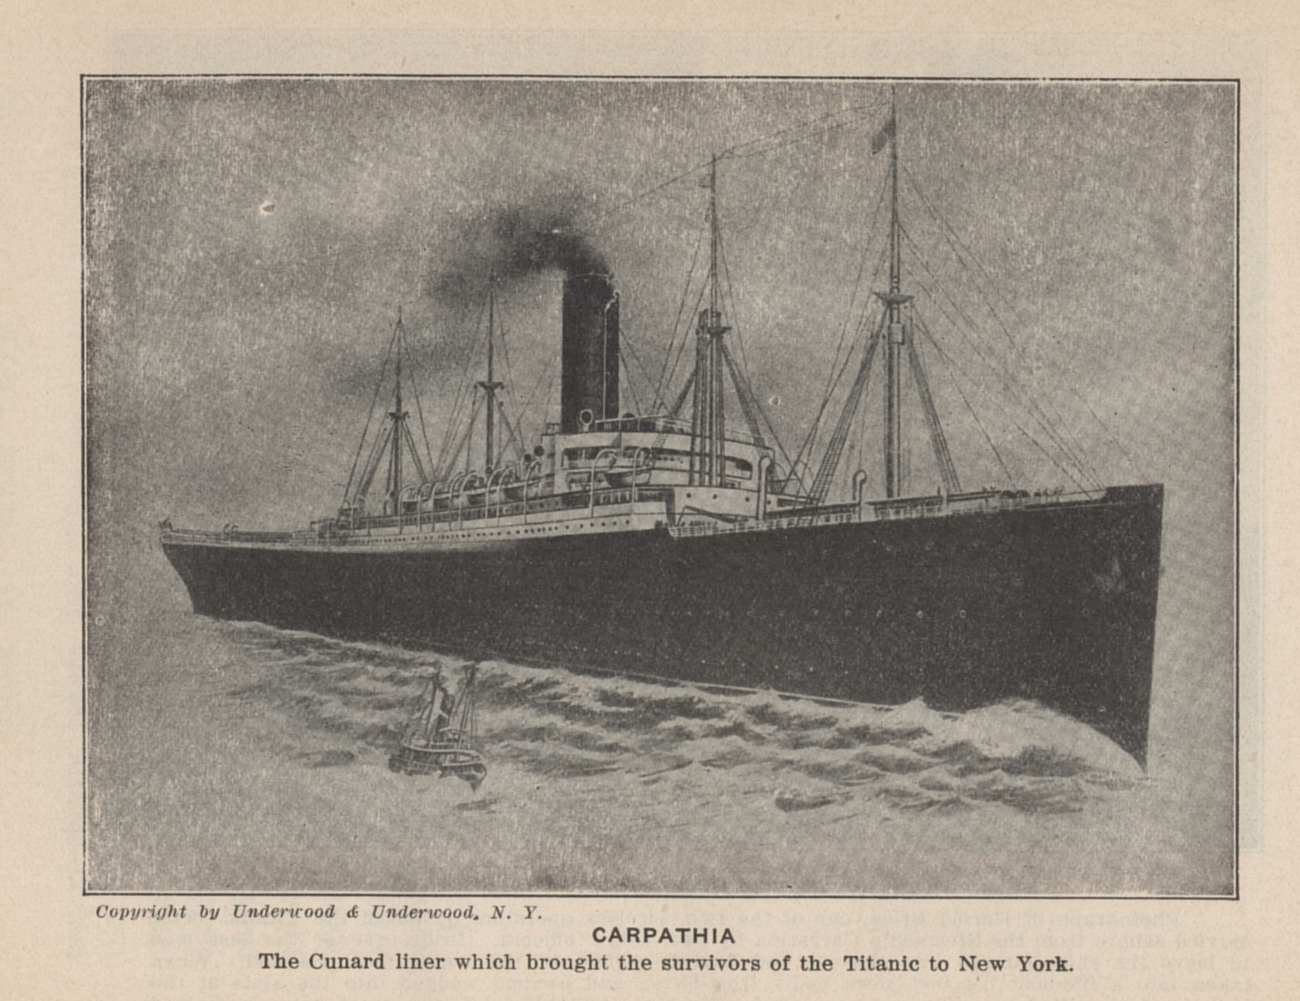 The CARPATHIA, the Cunard liner that brought the survivors of the TITANICdisaster to New York